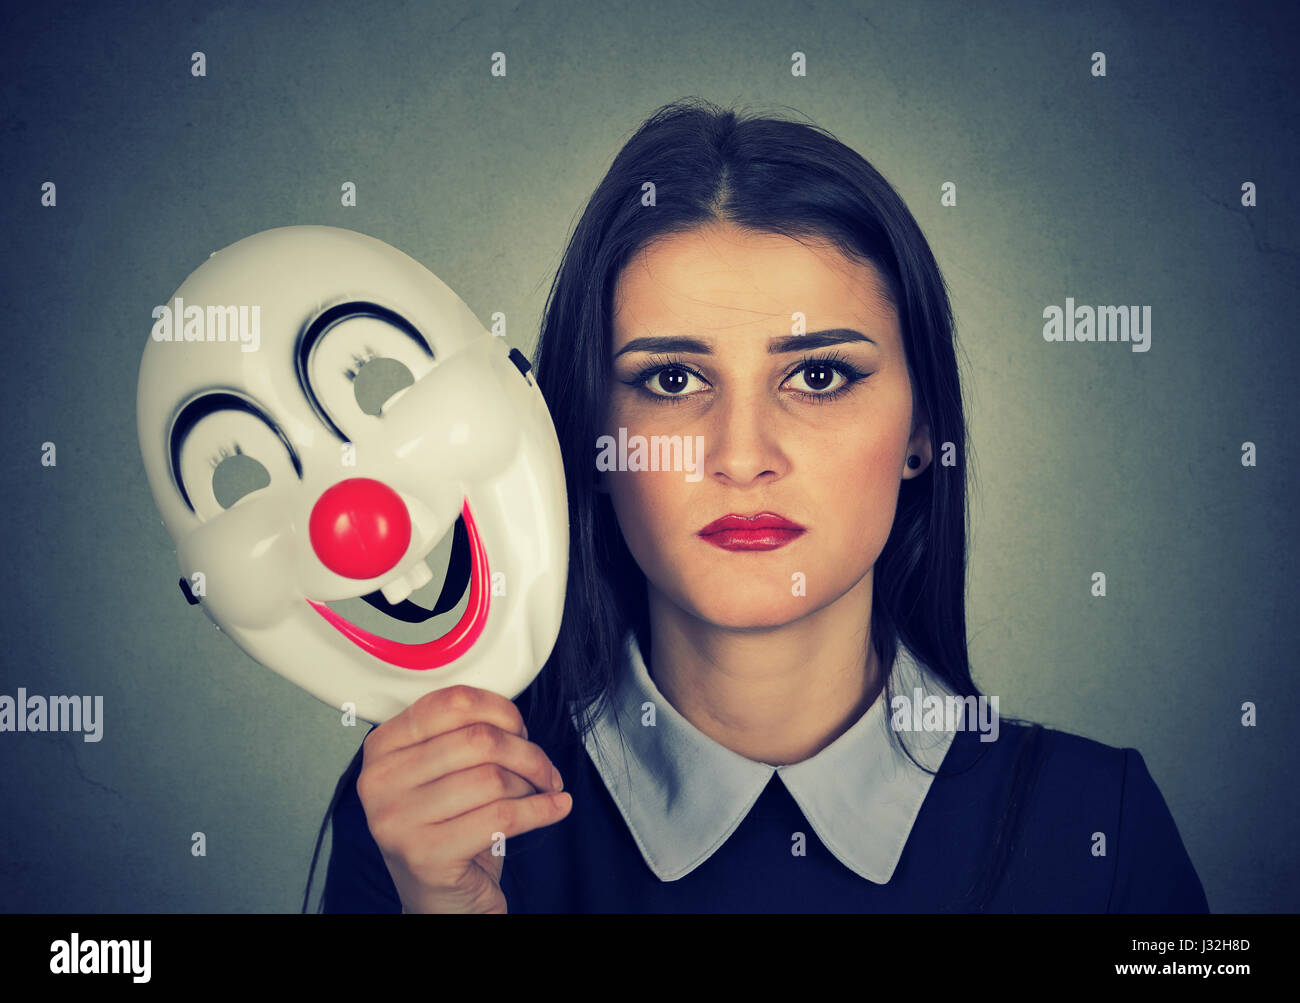 Young woman with sad face expression holding clown mask expressing cheerfulness happiness isolated on gray wall background Stock Photo